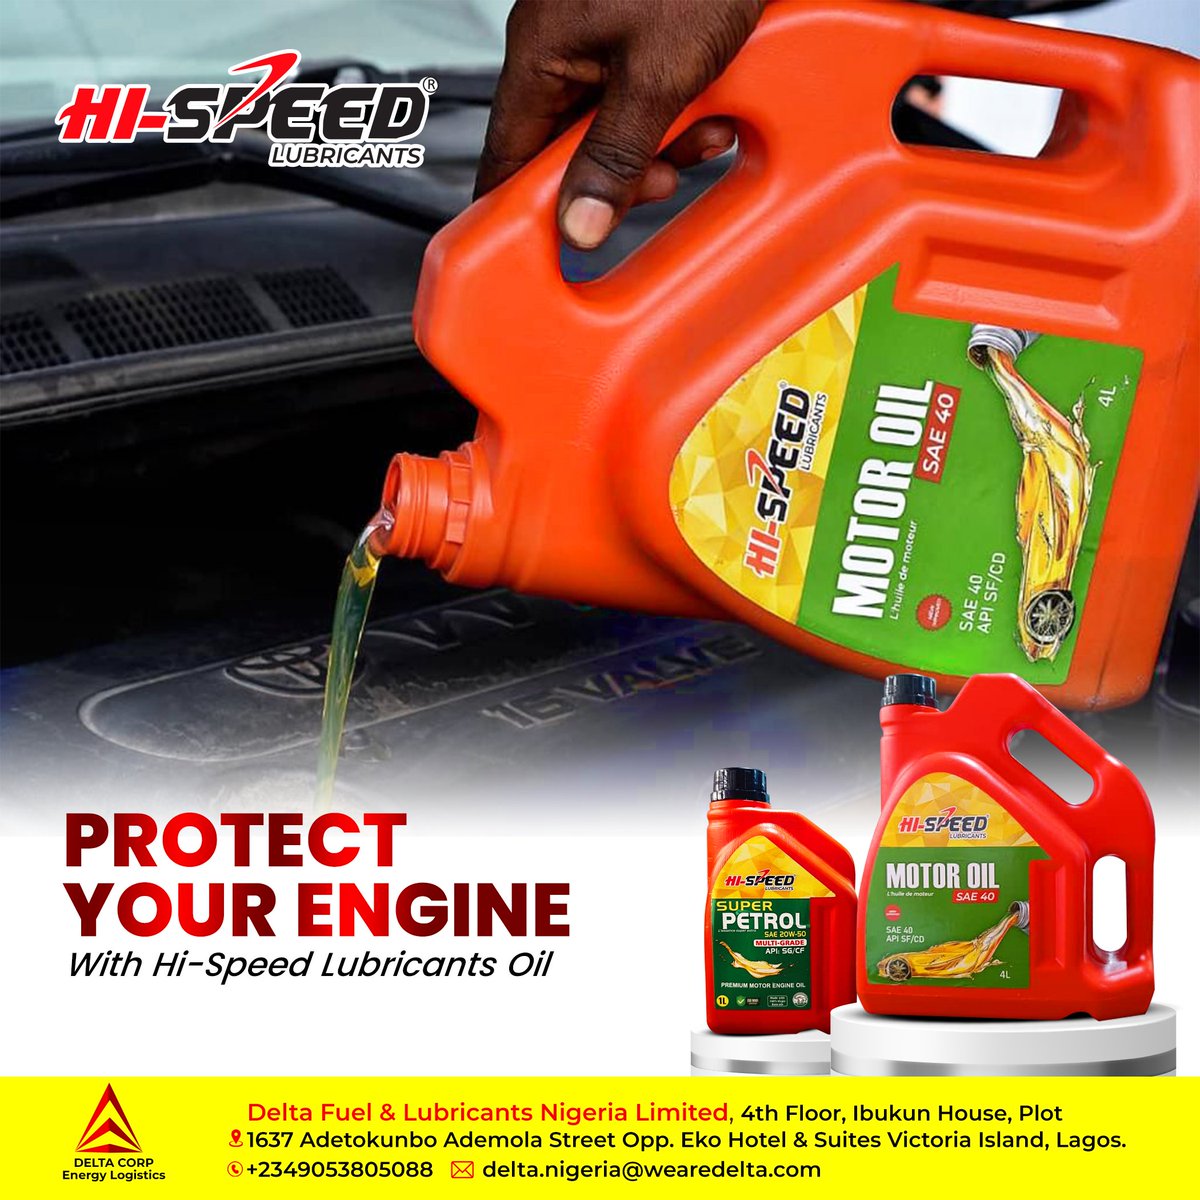 Protecting your engine is crucial for smooth and efficient performance. 
Hi-speed Lubricants offer top-notch protection against wear and tear, ensuring your engine stays in peak condition.
.
.
#hispeedlubricants #wearedelta
#superprotection #engineperformance